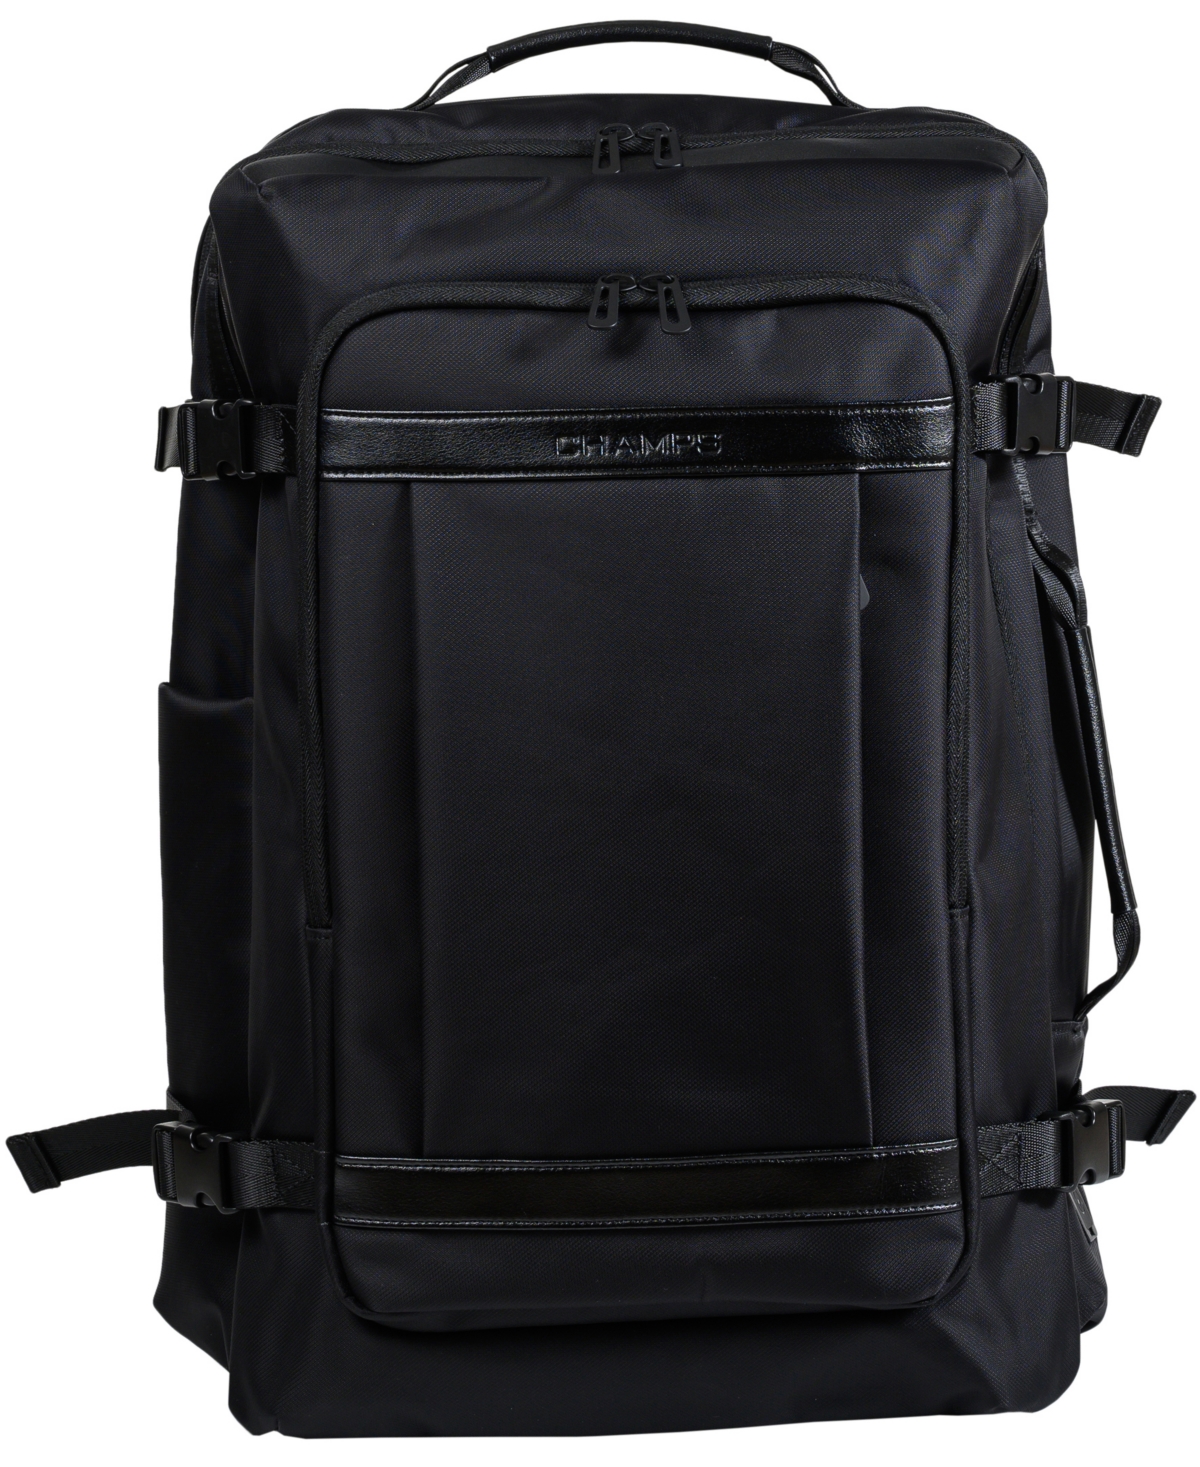 Onyx Collection - Carry-On Backpack with Usb Port - Black